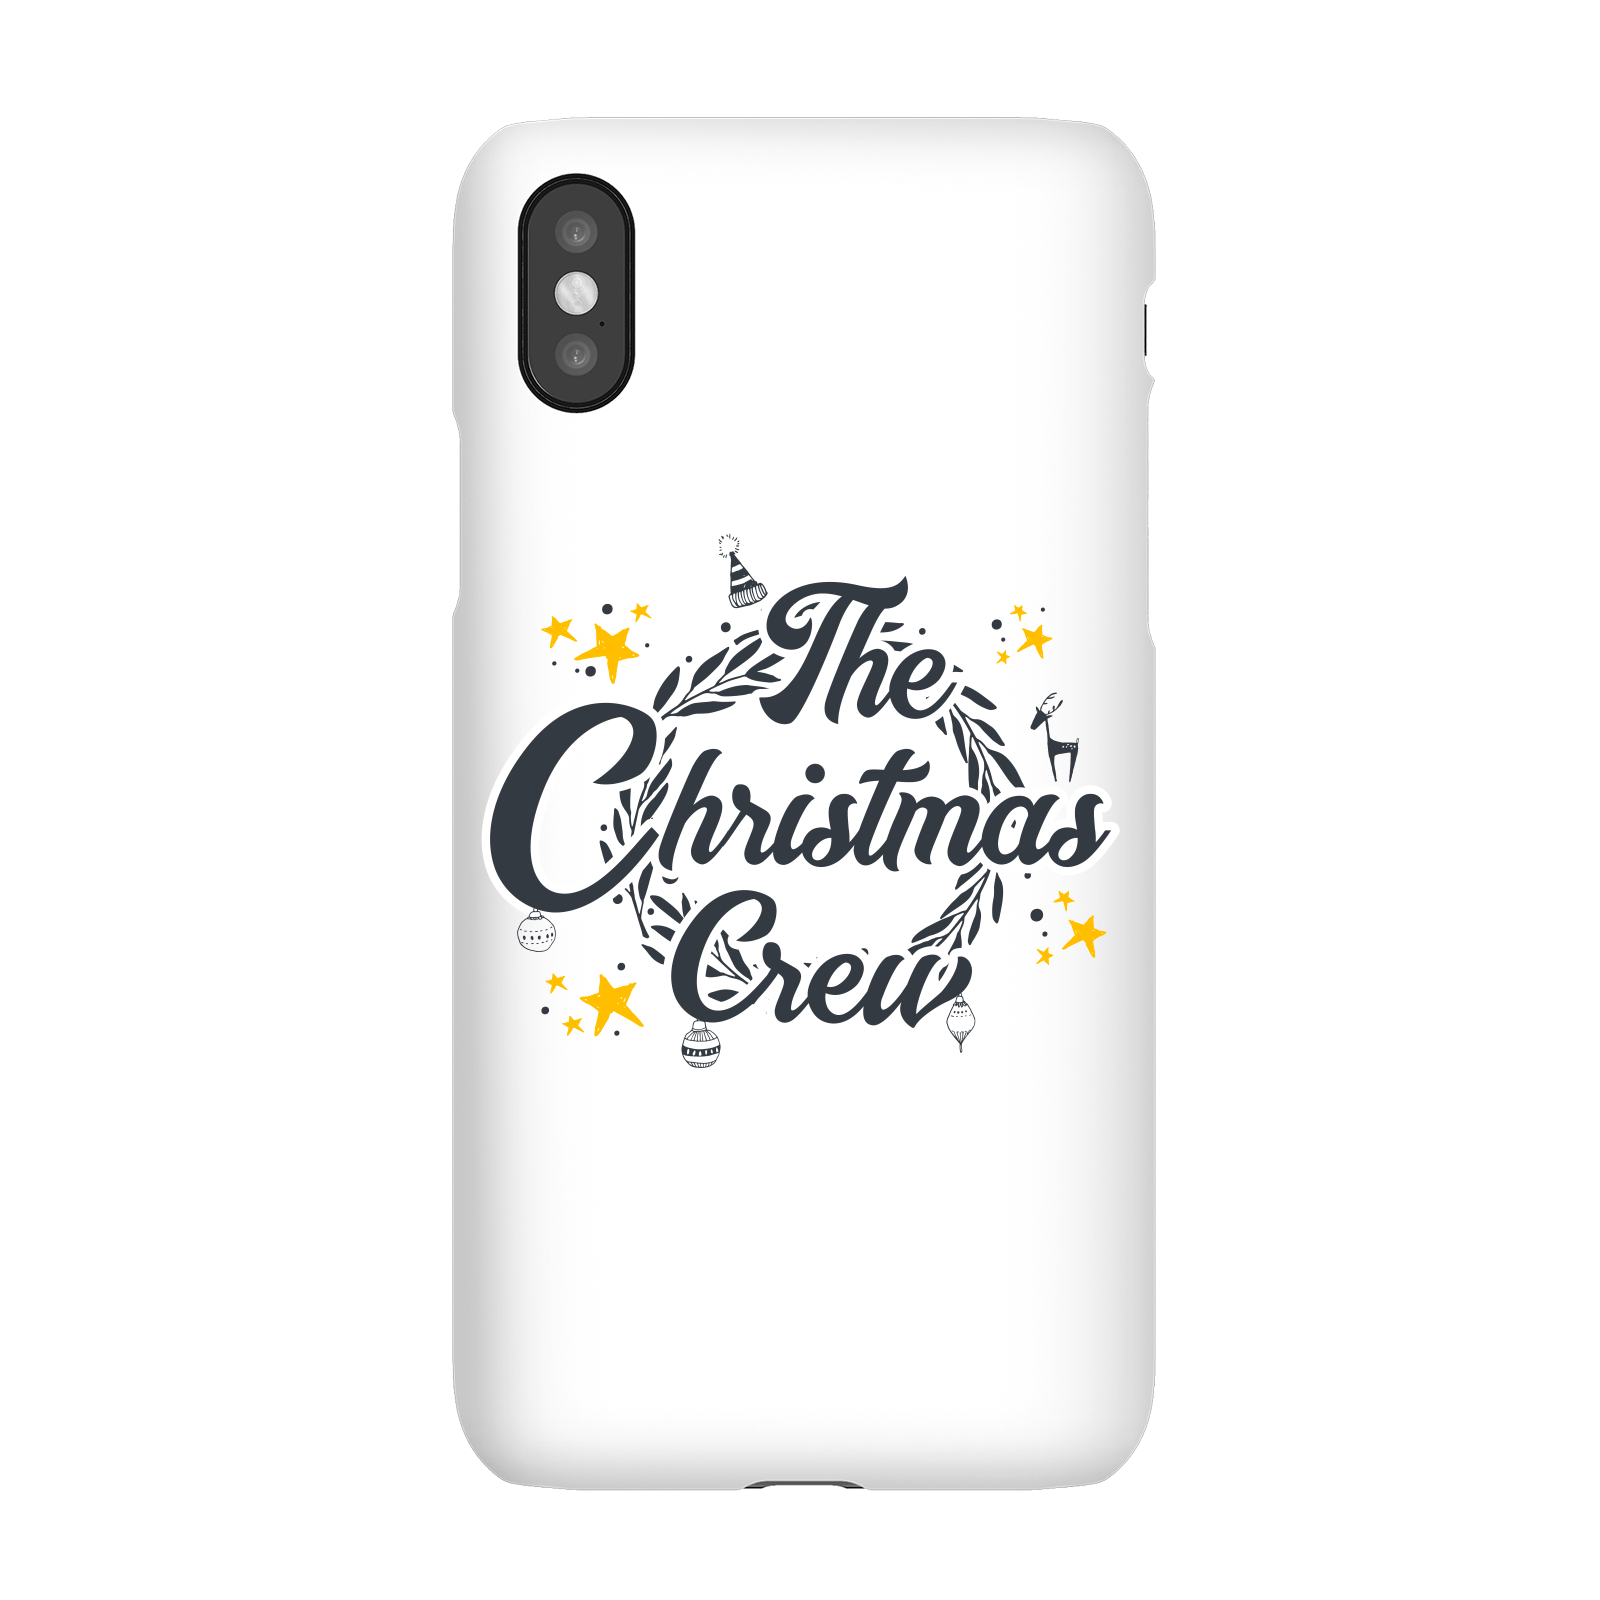 The Christmas Crew Phone Case for iPhone and Android - iPhone 5/5s - Snap Case - Matte